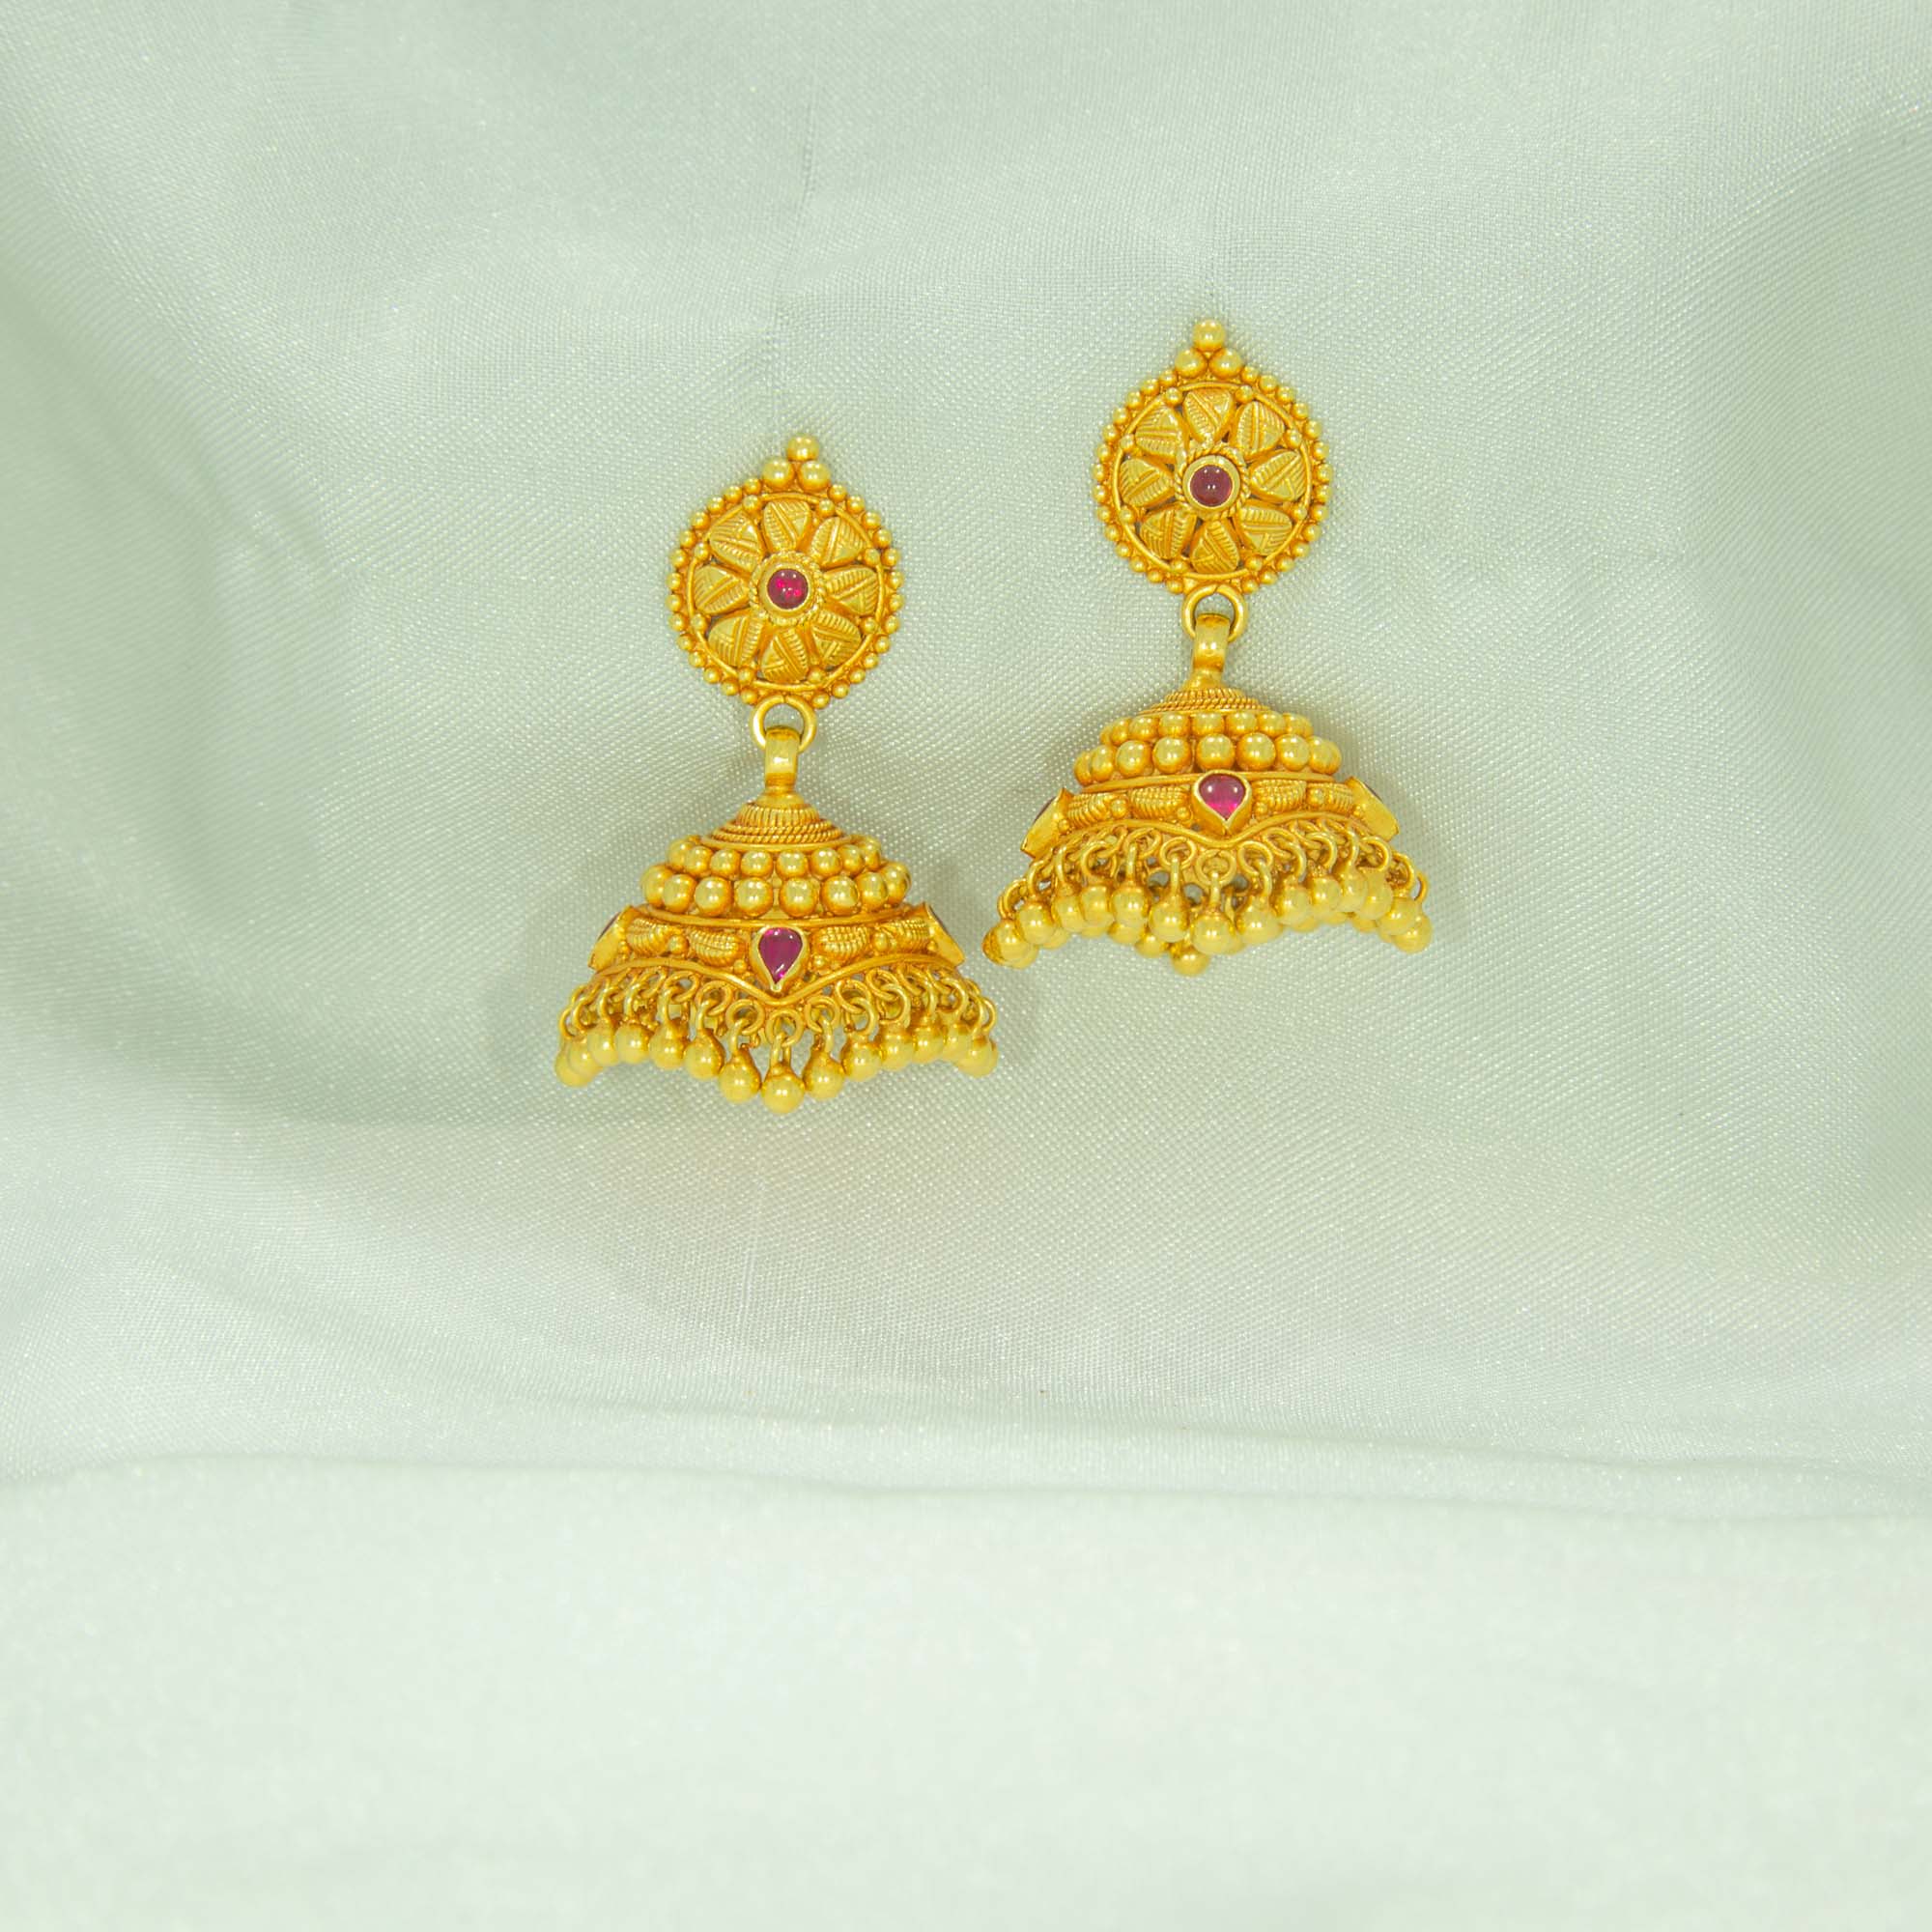 Tarinika Antique Gold Plated Leela Jhumka Earrings with Lakshmi Idol Design   Indian Earrings for Women Perfect for Ethnic ocassion  Traditional  Earrings For Women  Amazonin Fashion